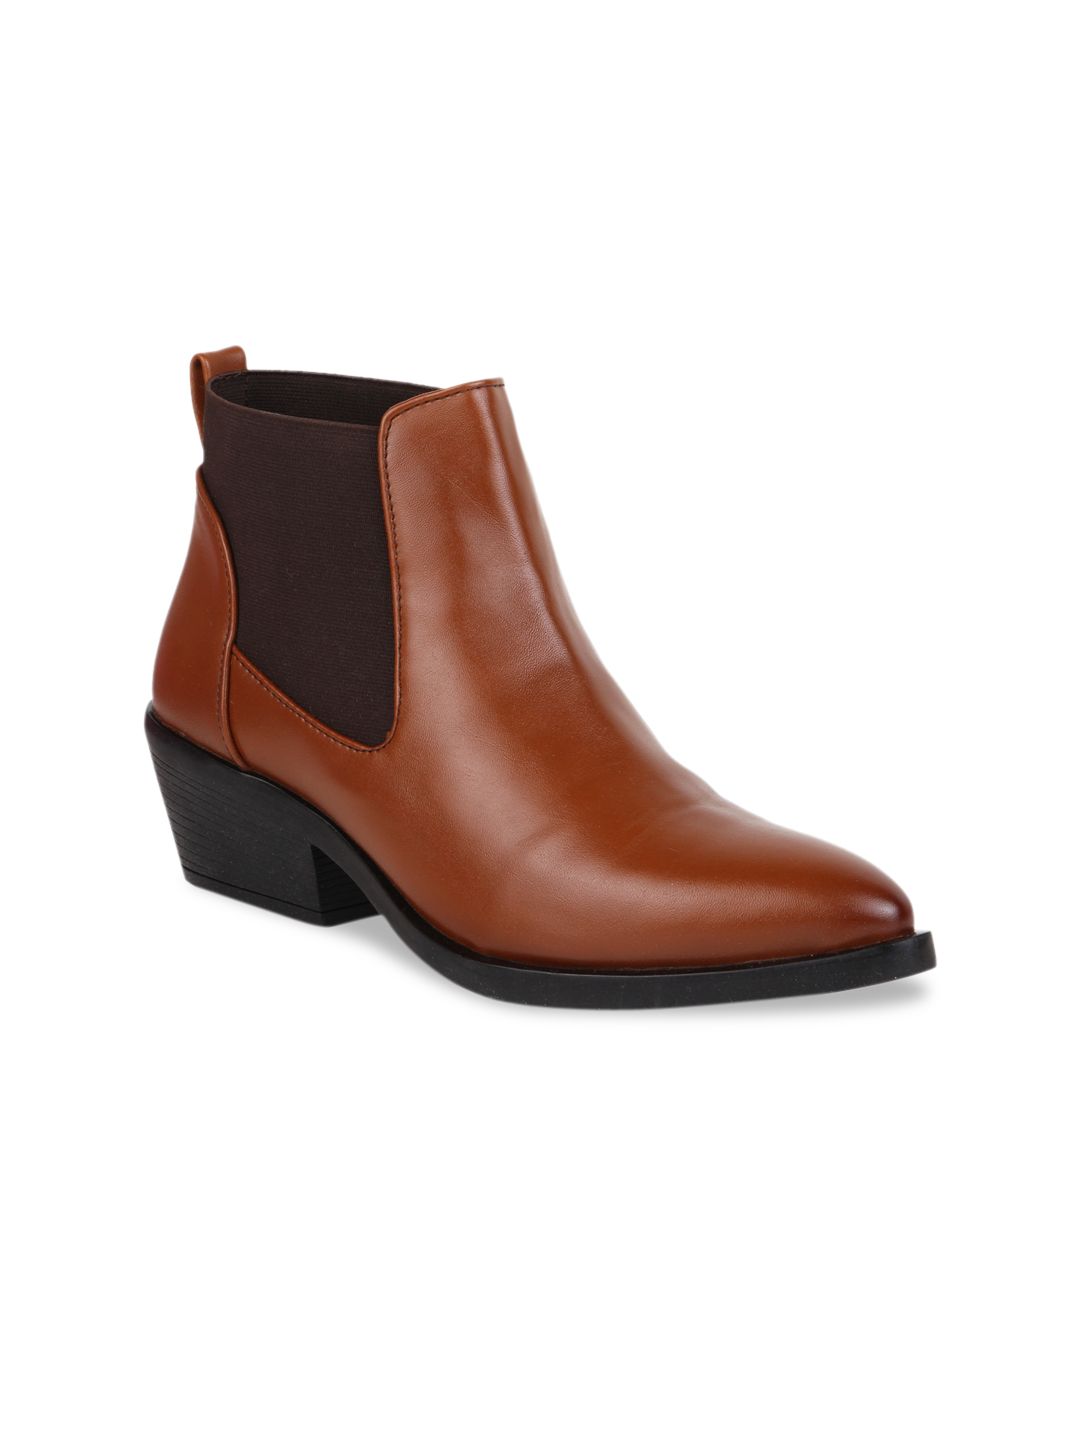 Rocia Women Tan Solid Heeled Boots Price in India